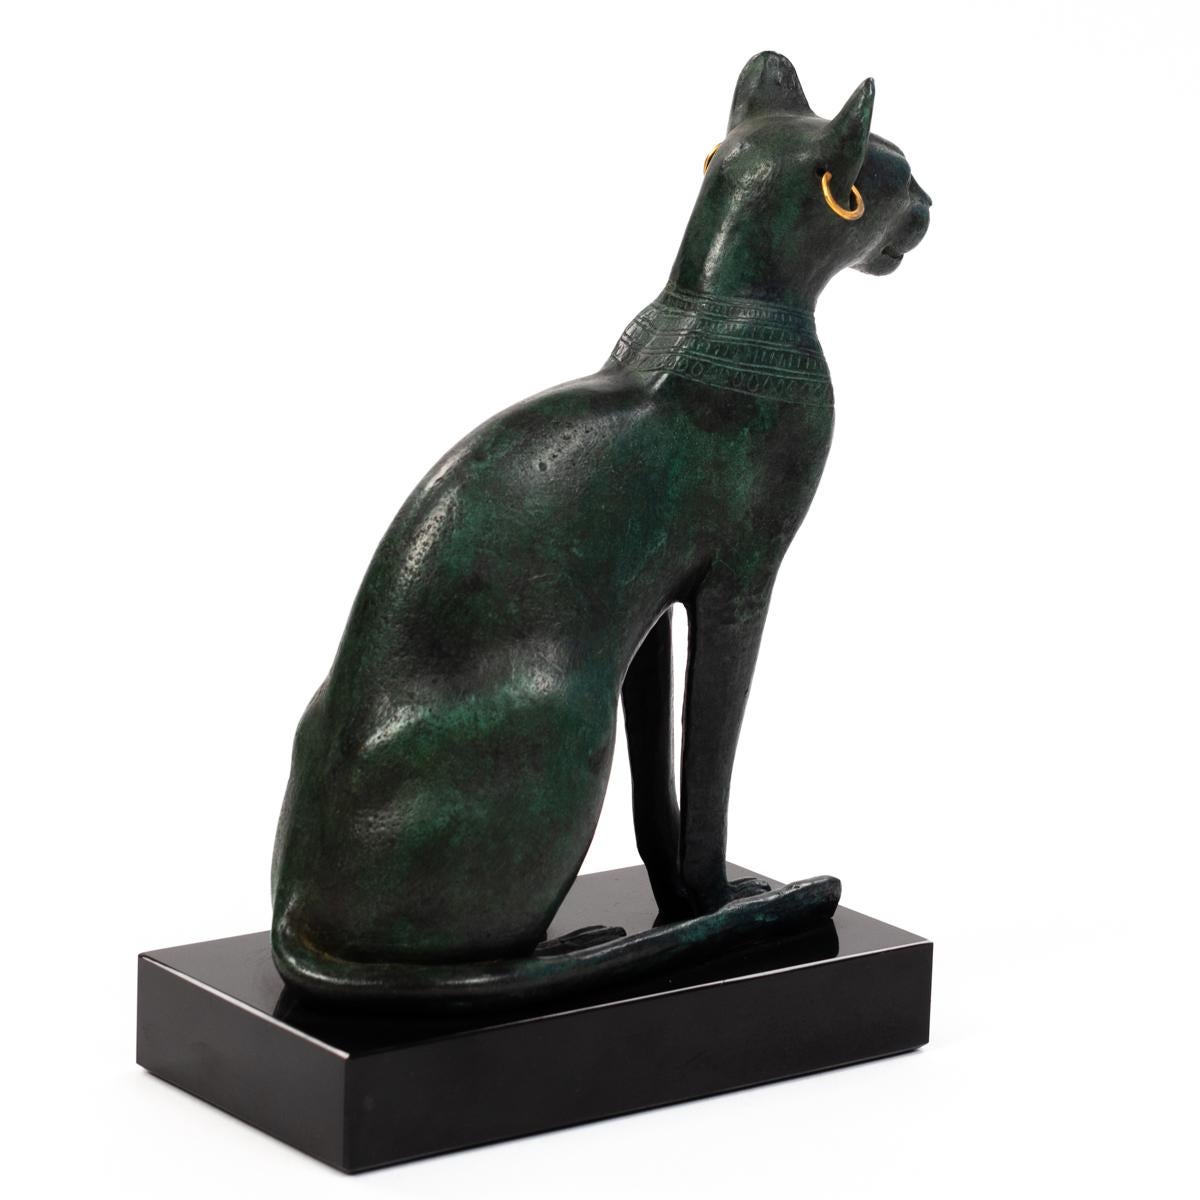 Elegant midcentury sitting bronze bastet sculpture, France, 1960s.

The Bastet cat god sits elegantly and straight on a black marble base. The tail lies resting nestled against the body next to it. Several surrounding decorative bands nestle along